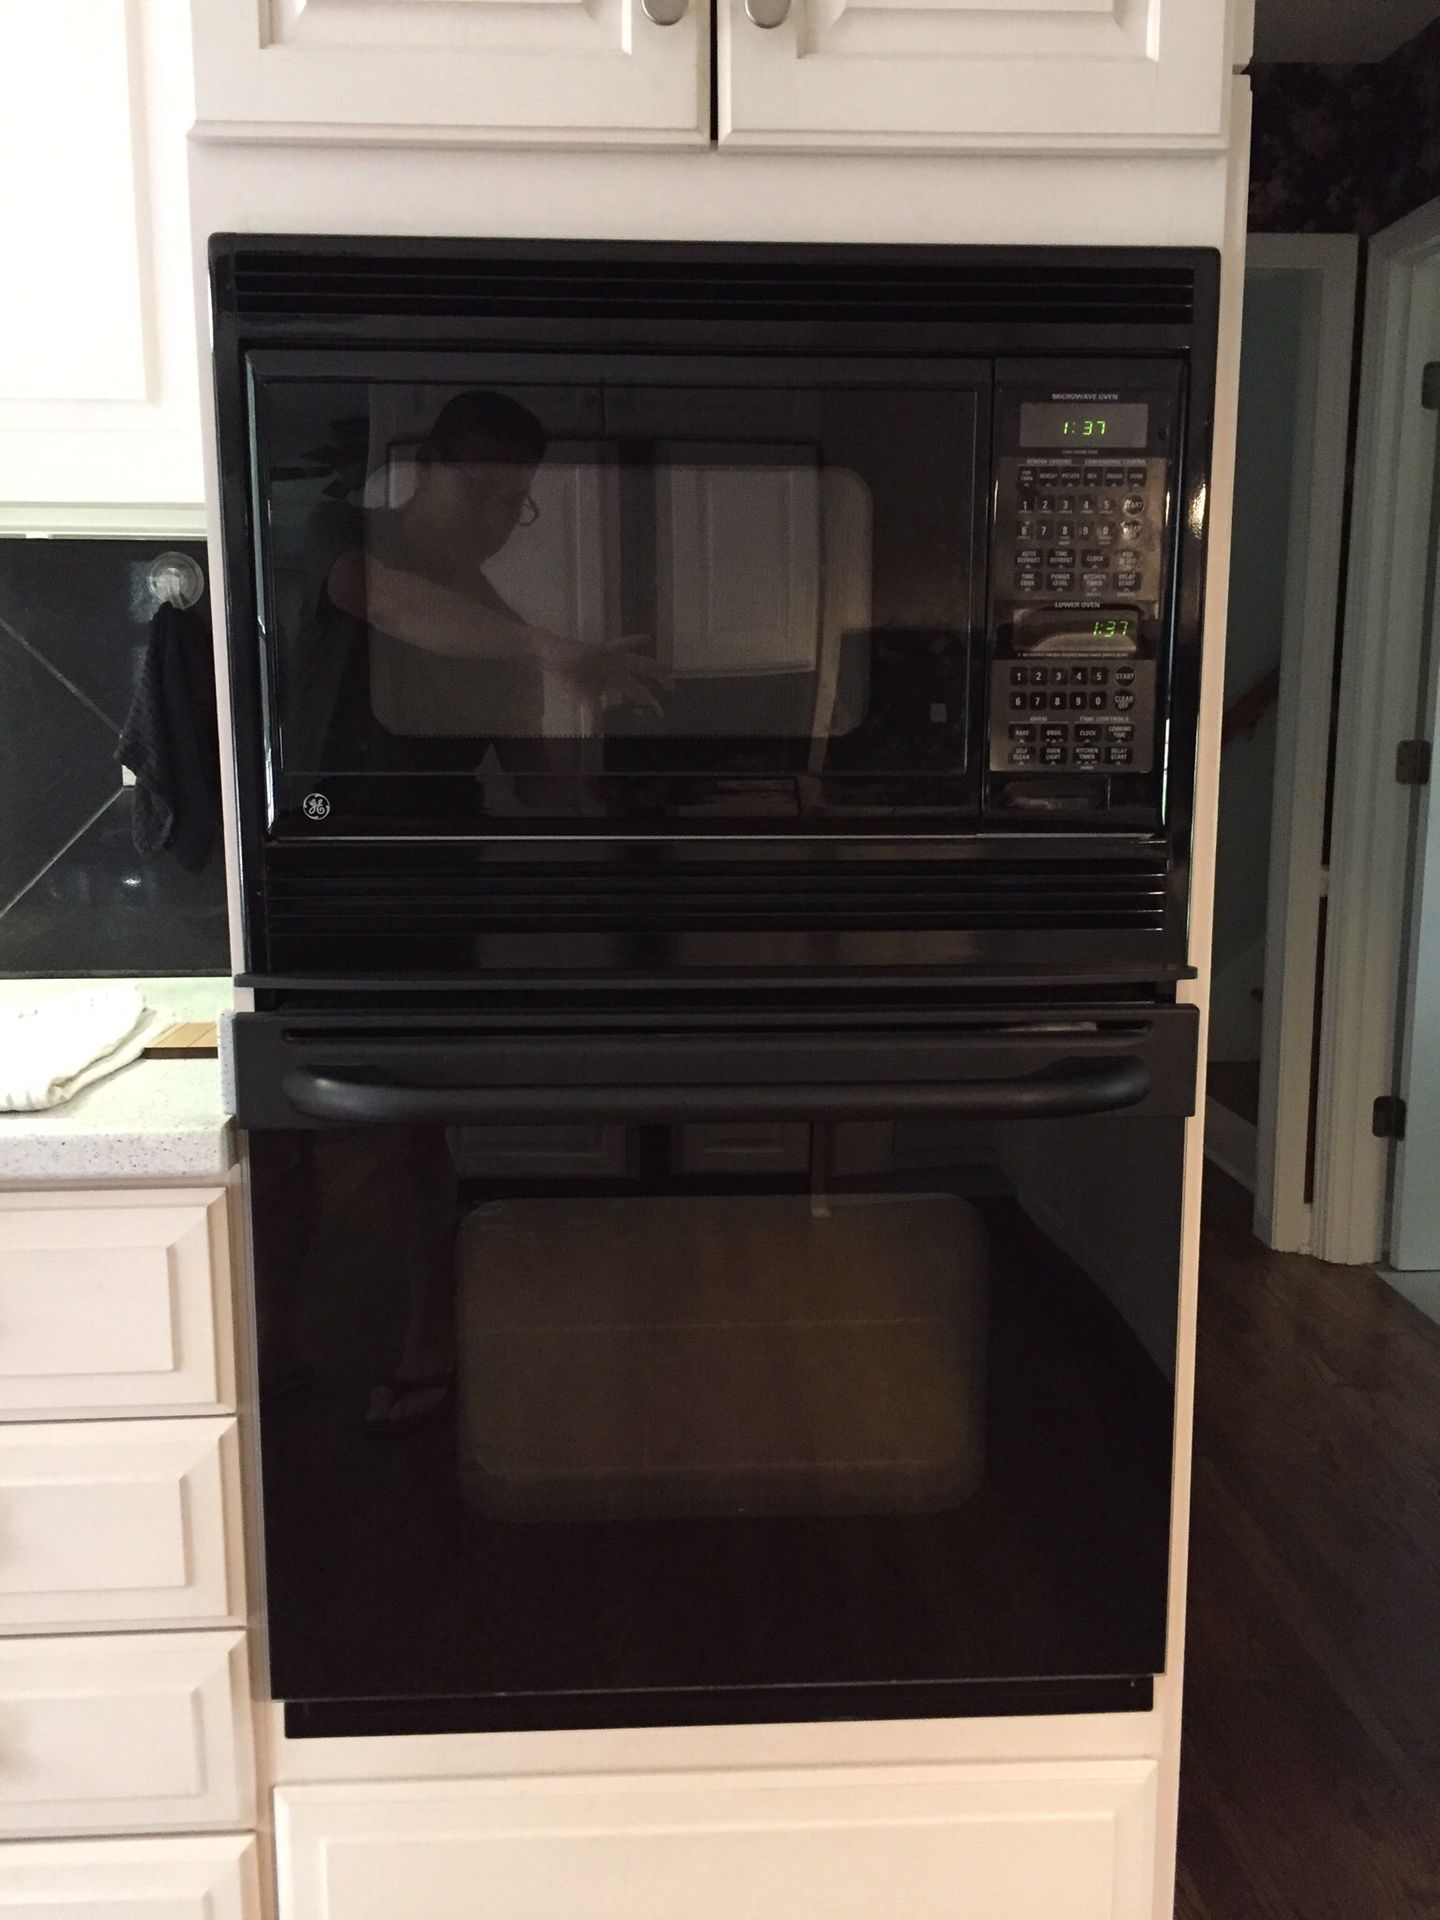 GE Oven/Microwave Combo 27”